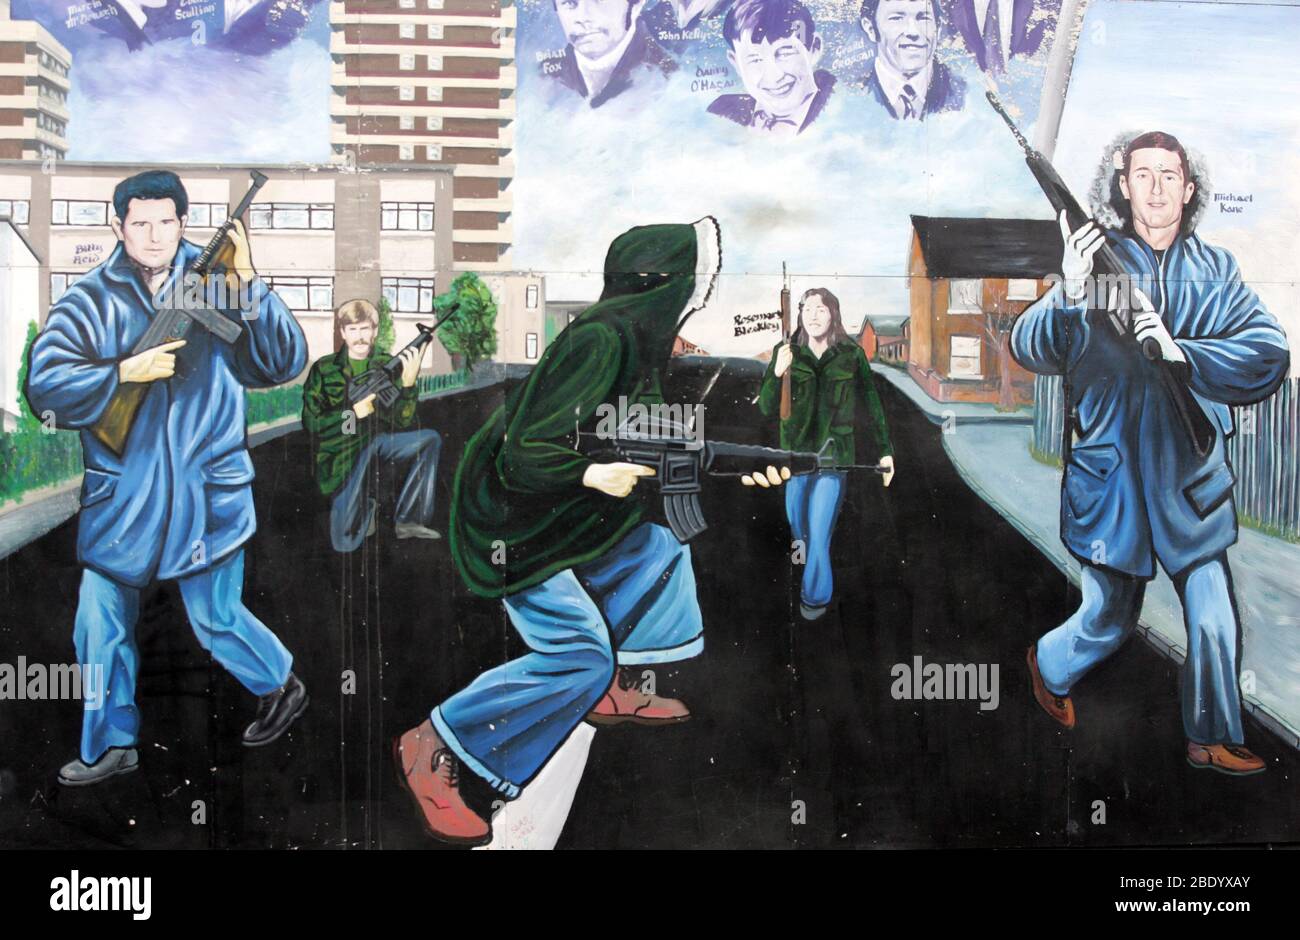 An Irish Republican Army Mural Shows Members Of The Ira On Patrol In North Belfast Northern Ireland Ira Decommissioning Is Confirmed Ira Decommissioning Has Been Confirmed A Report From General John De